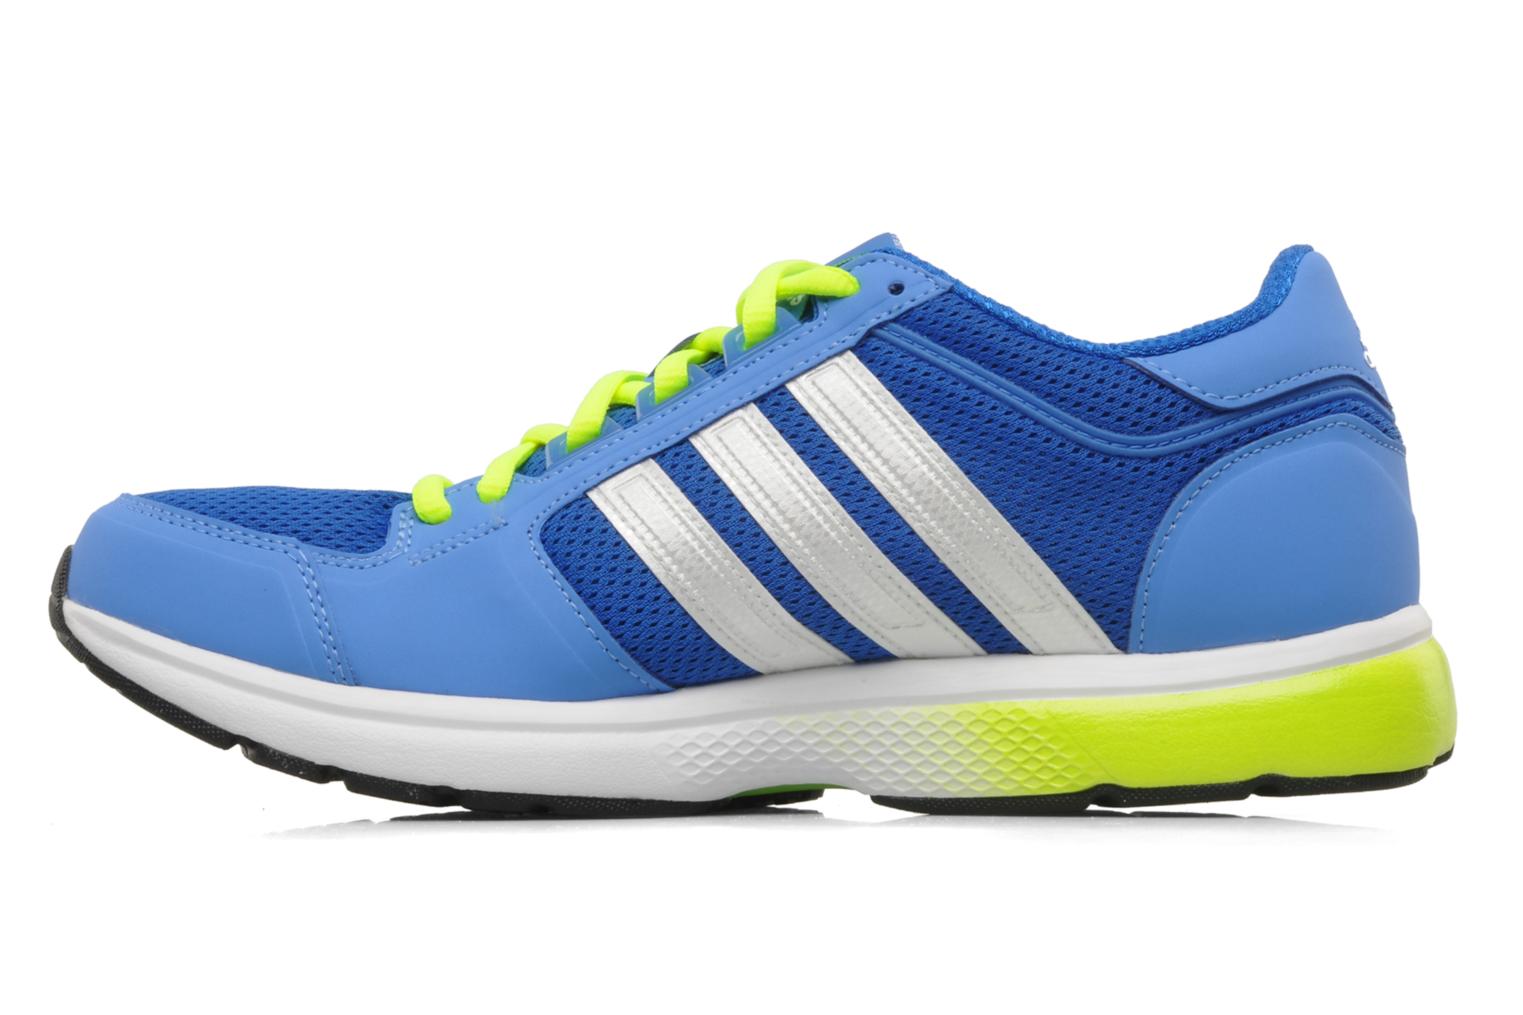 Adidas Performance Oregon 11 Sport shoes in Blue at Sarenza.co.uk (94538)